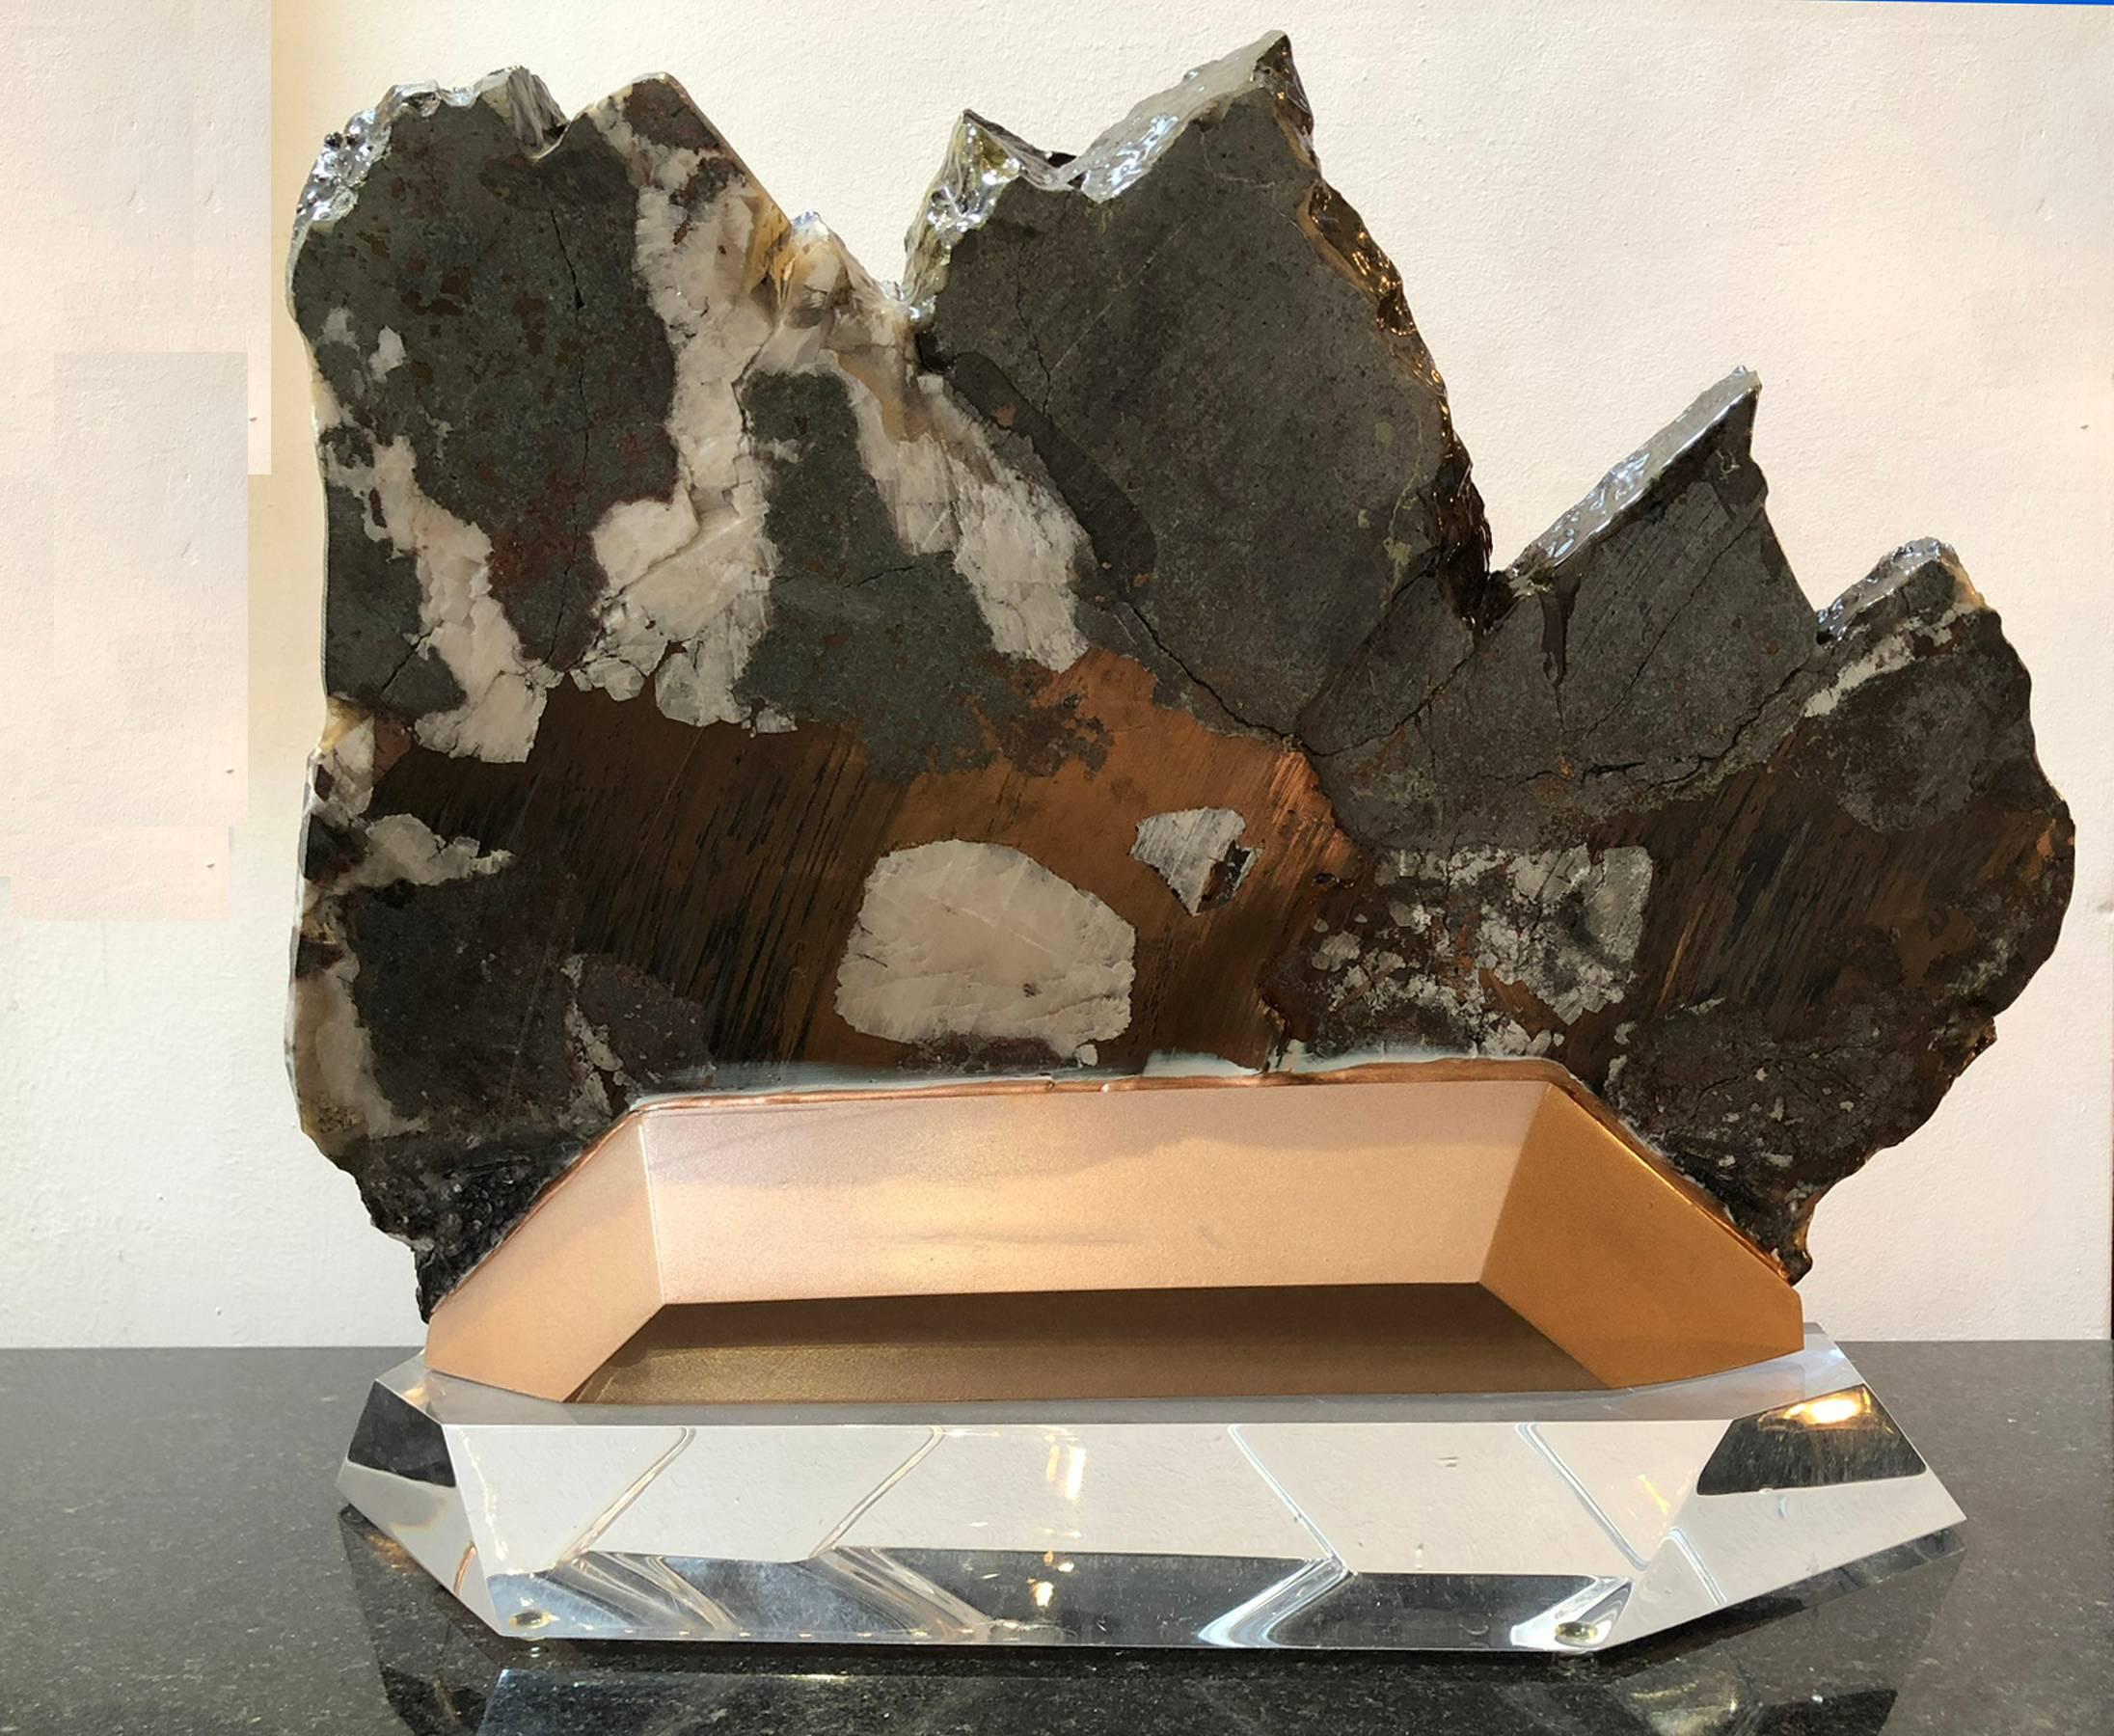 Mineral specimen that has been polished and custom mounted on Lucite.